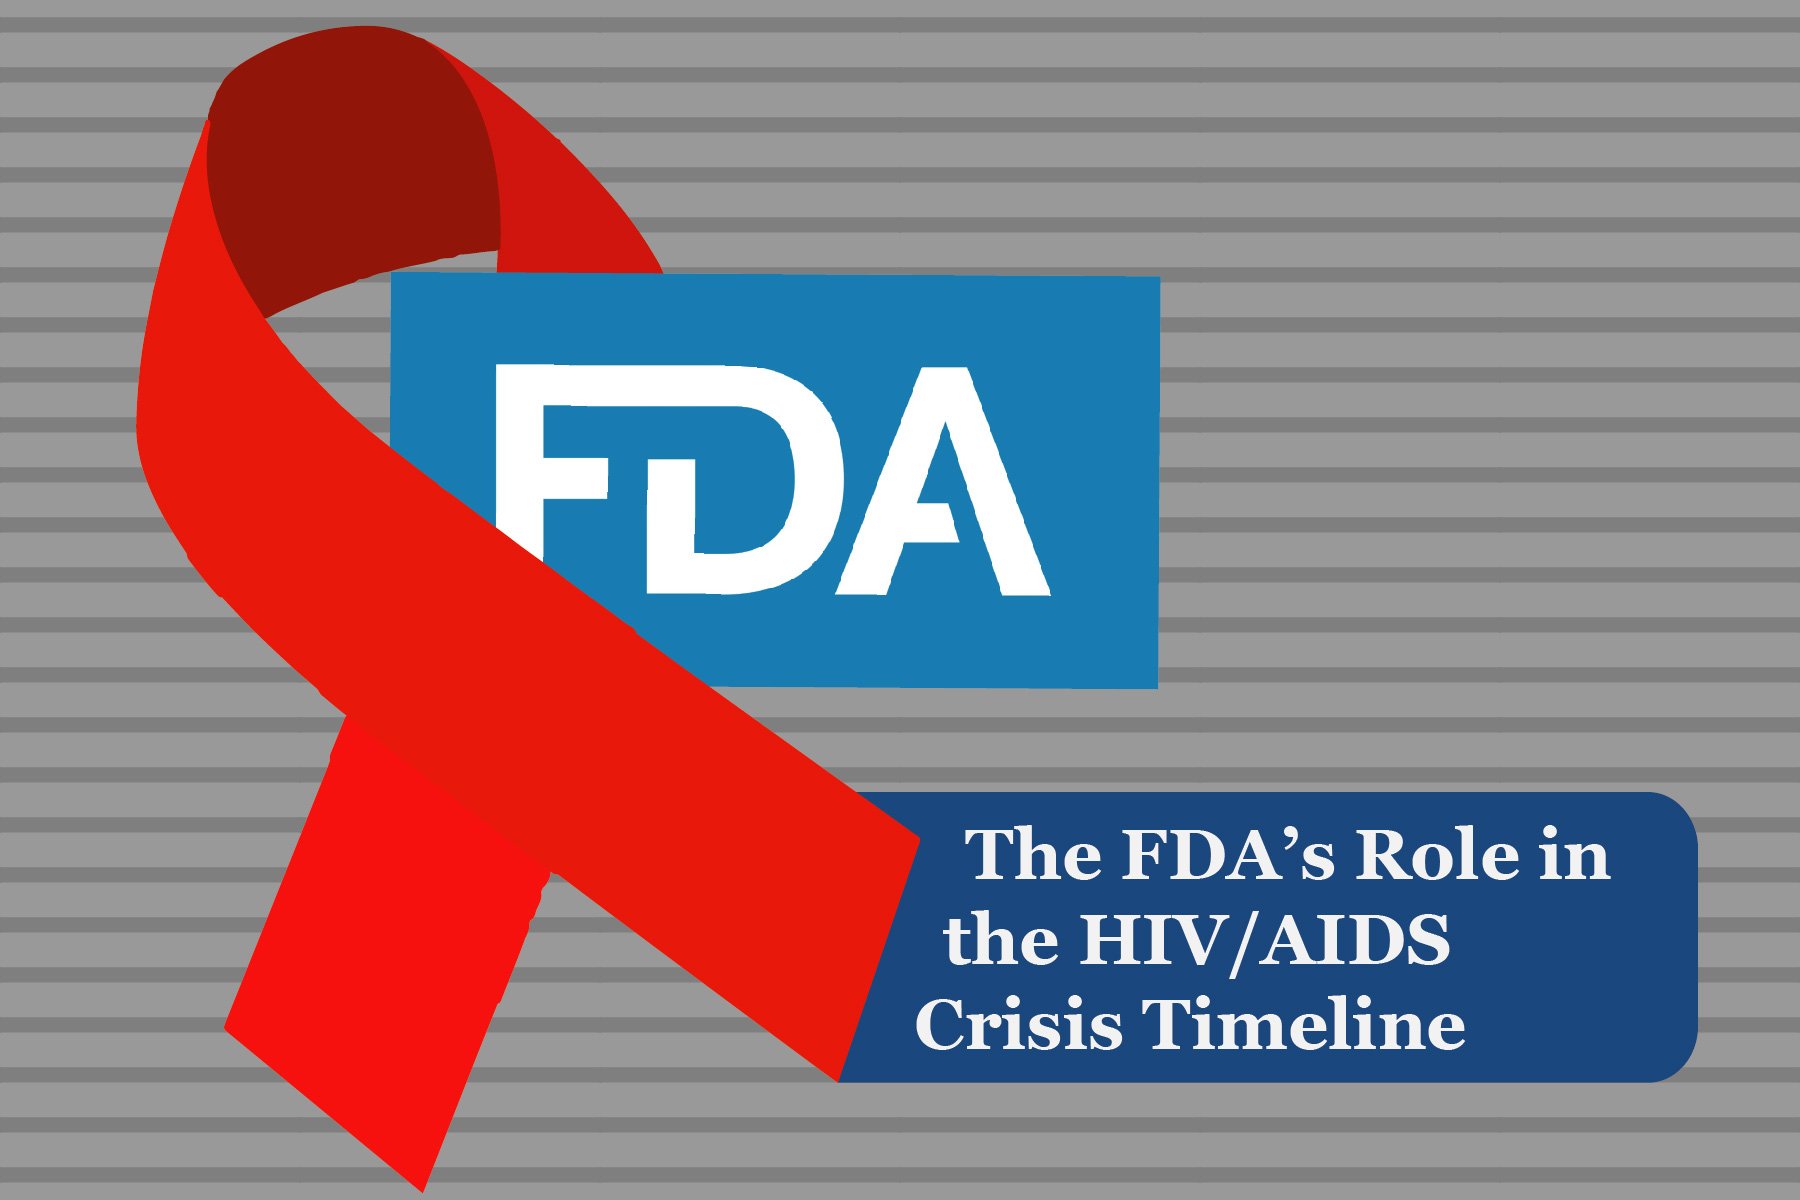 The FDA’s Role in the HIV/AIDS Crisis Timeline